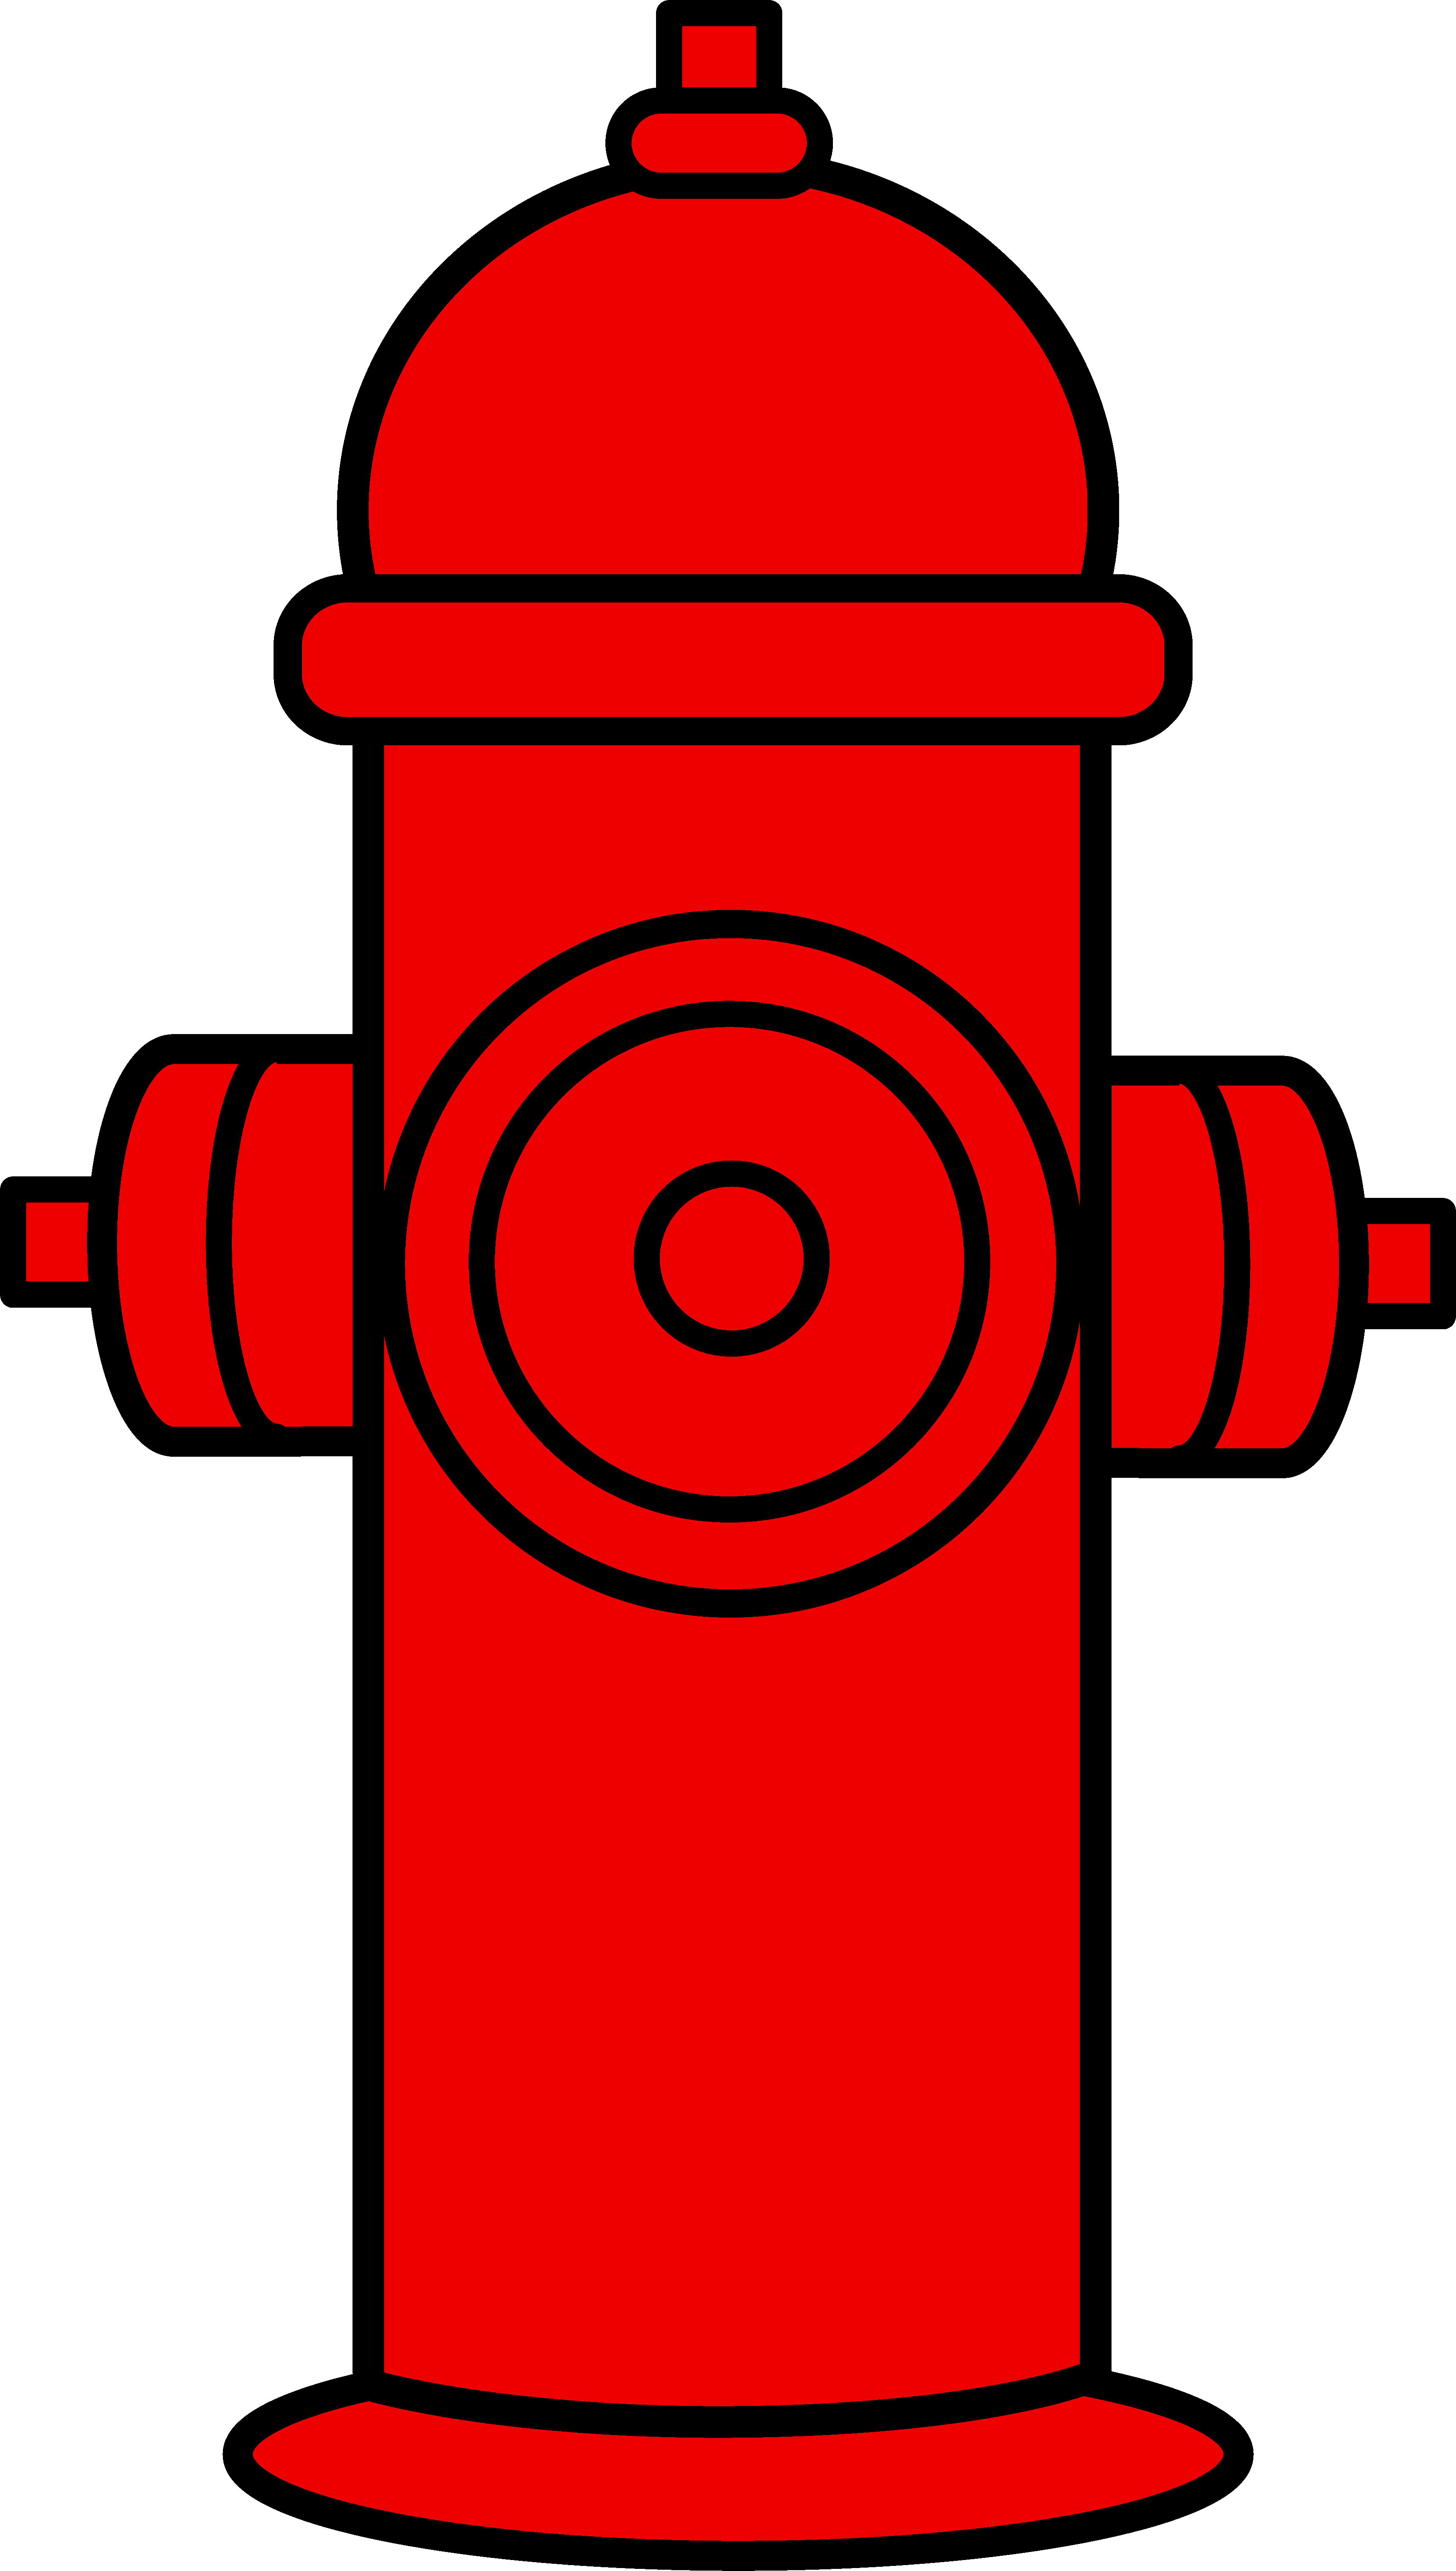 fire hydrant drawing at getdrawings free for personal use fire fire ...